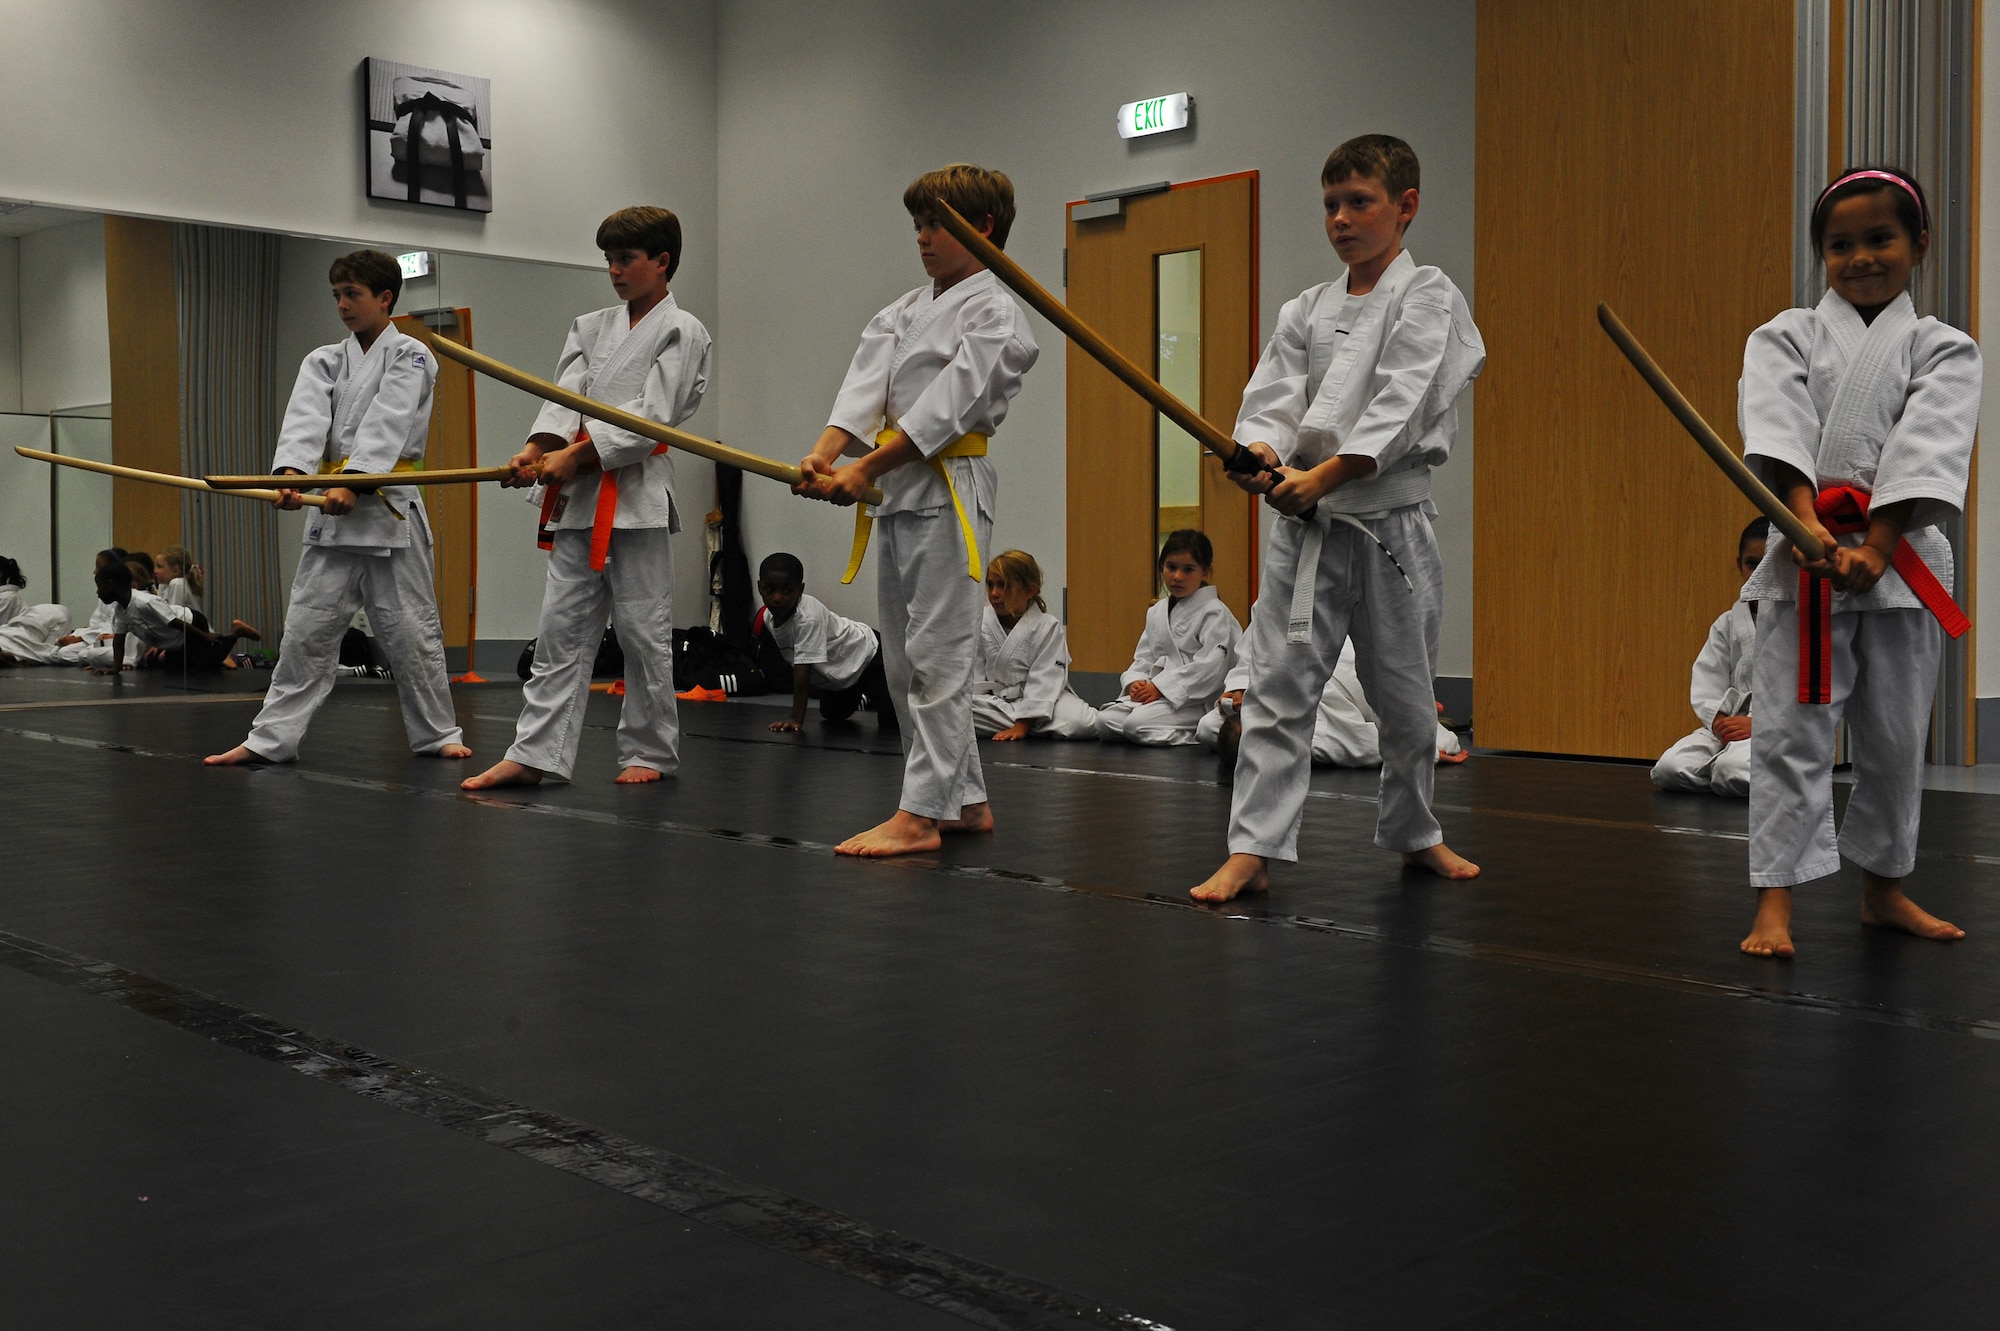 Members of the Youth Aikido class practice different defensive techniques at the Youth Center on Ramstein Air Base, Germany, Sept. 11, 2012. The children participate in the Aikido class to learn self-defense techniques Tuesdays from 5:45 to 6:30p.m. and 6:30 to 7:15p.m. (U.S. Air Force photo/Airman 1st Class Holly Cook) 